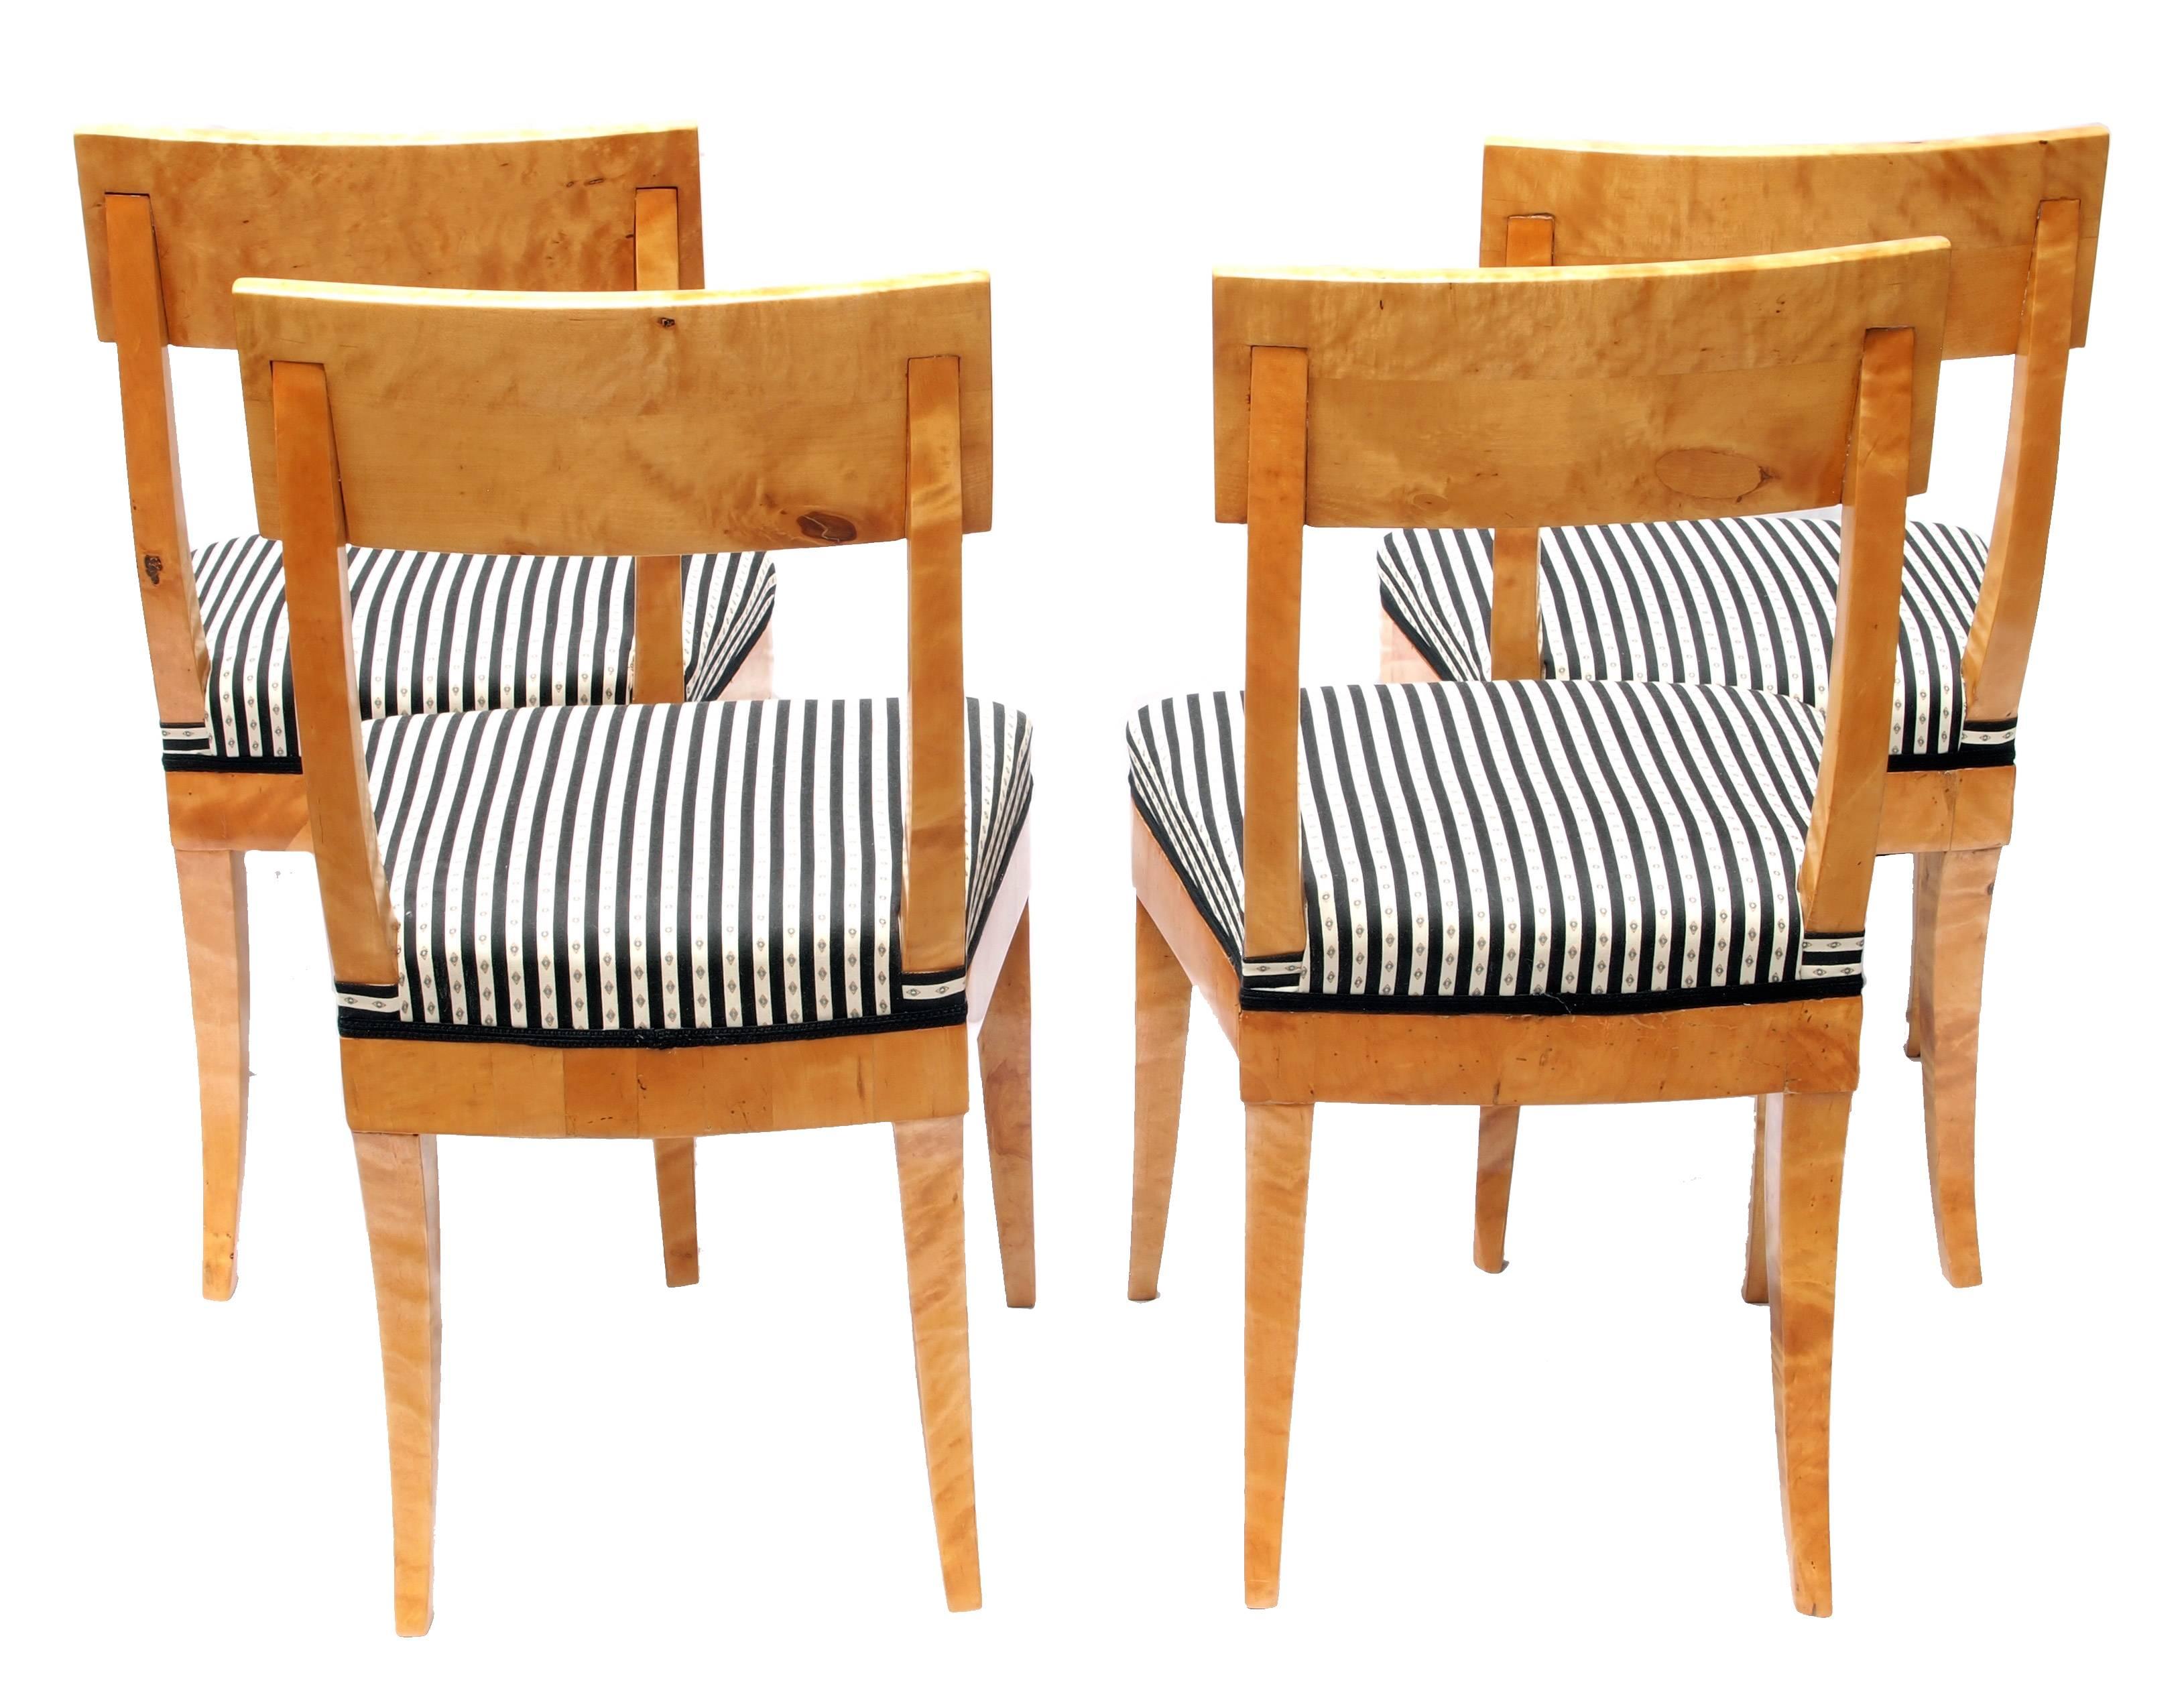 Polished Early 19th Century Set of Four Biedermeier Birch Wood Chairs from Germany For Sale